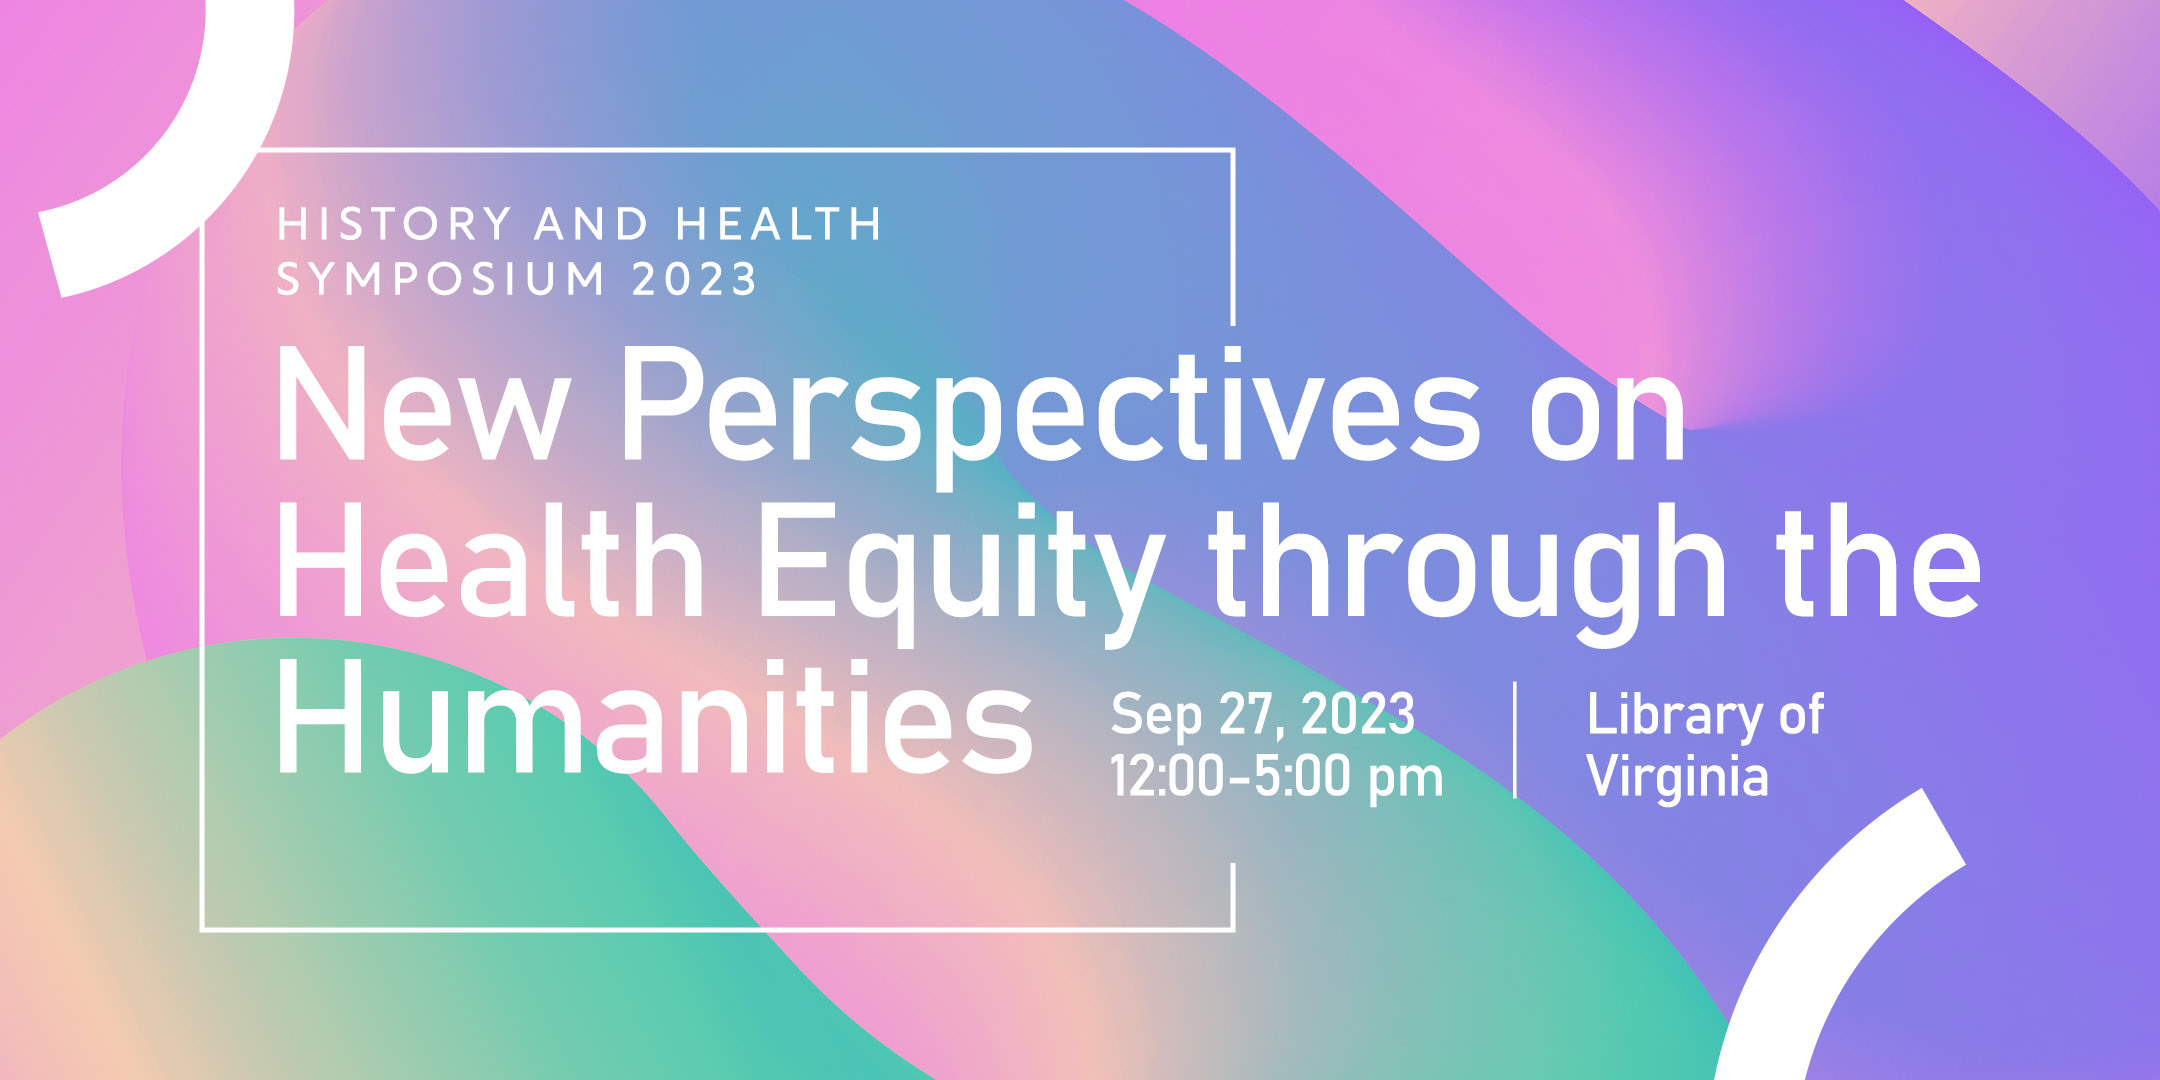 History and Health Symposium 2023: New Perspectives on Health Equity through the Humanities. Sep. 27, 2023, 12:00-5:00 p.m. at the Library of Virginia